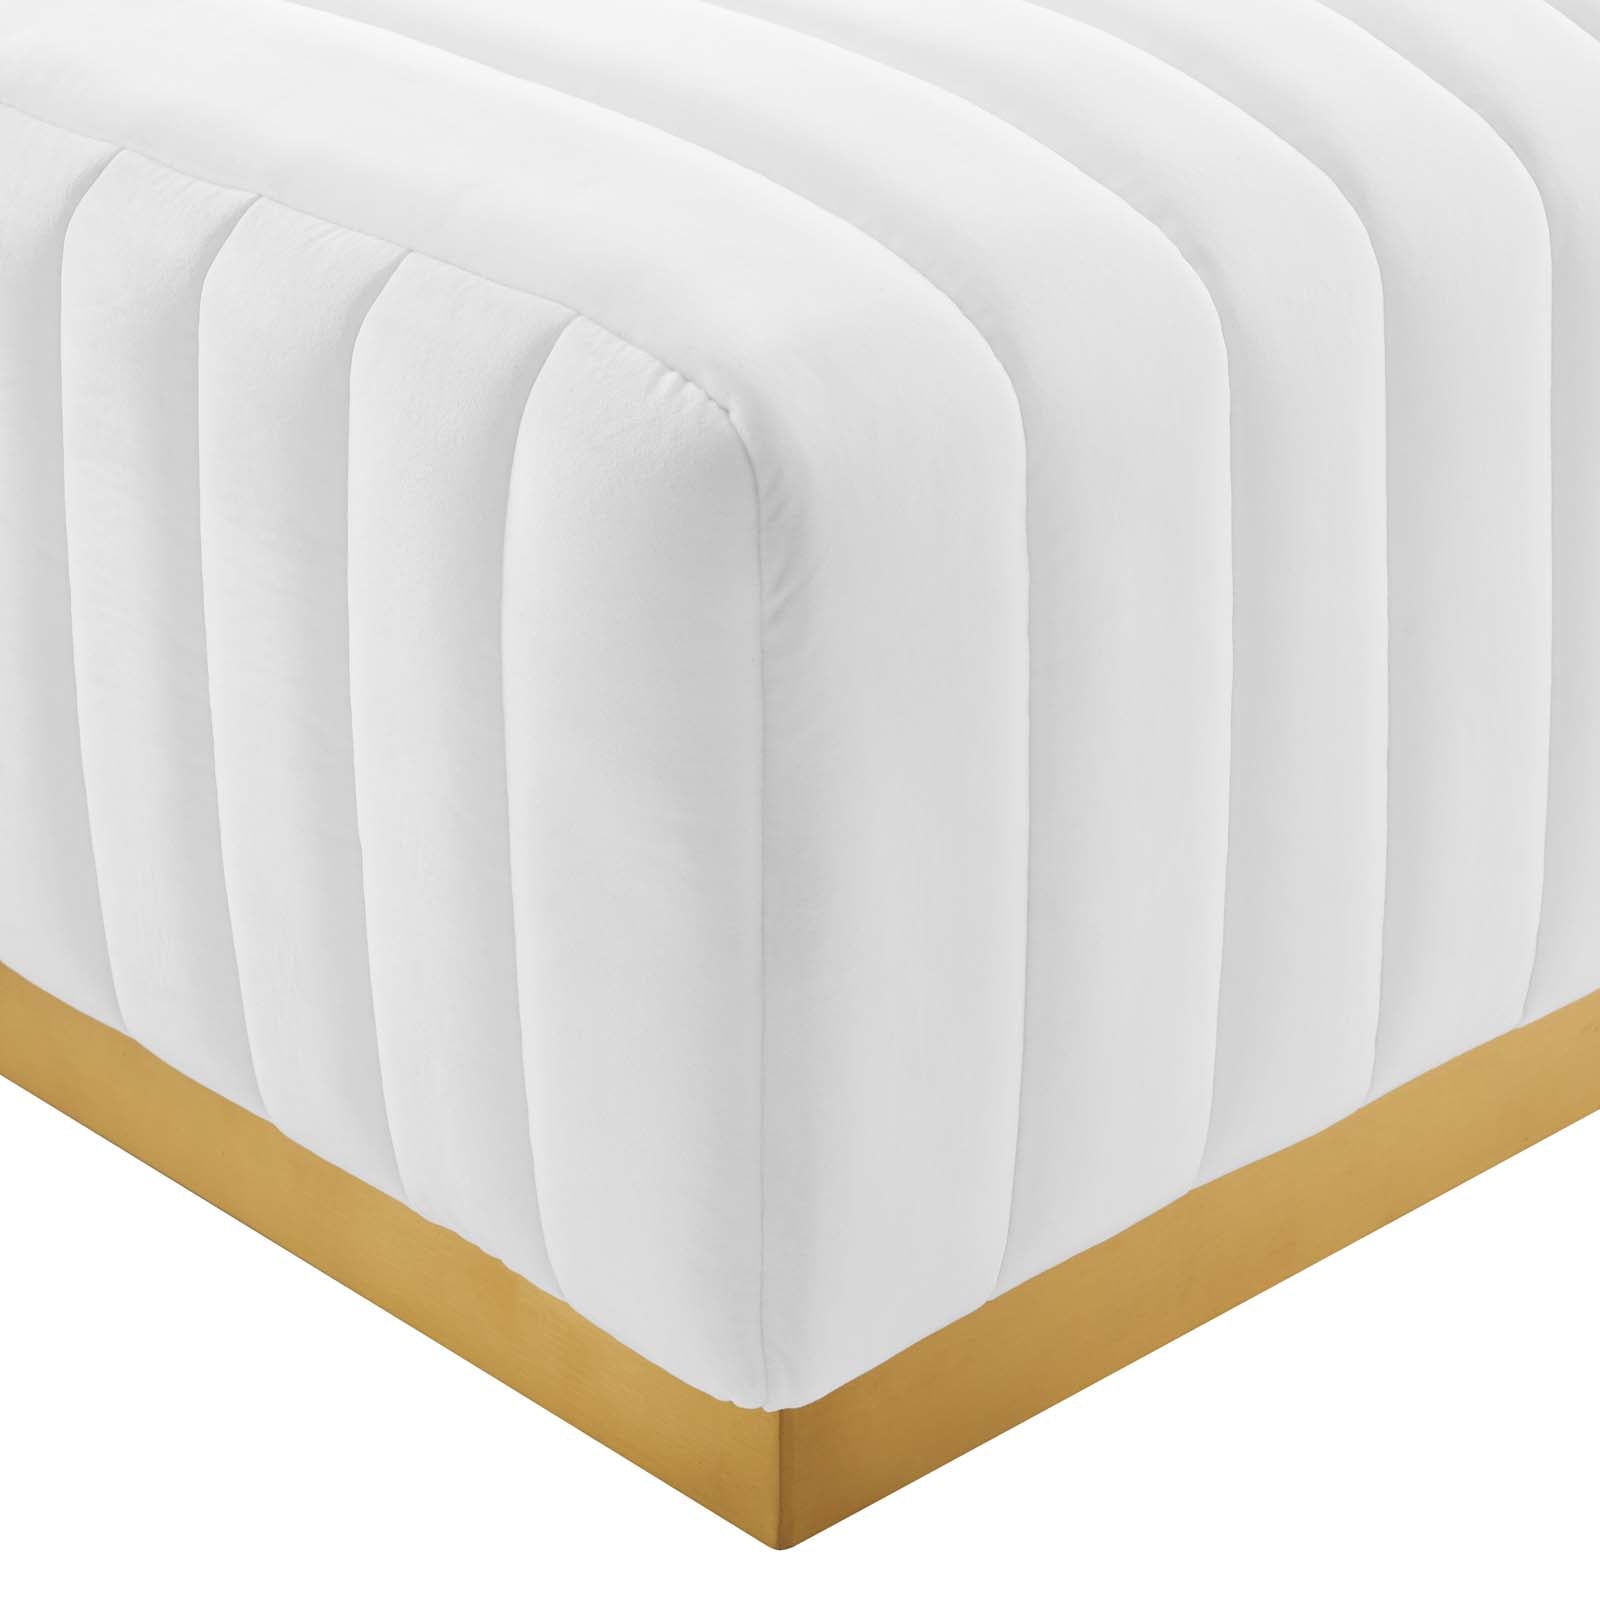 Conjure Channel Tufted Performance Velvet Ottoman-Ottoman-Modway-Wall2Wall Furnishings